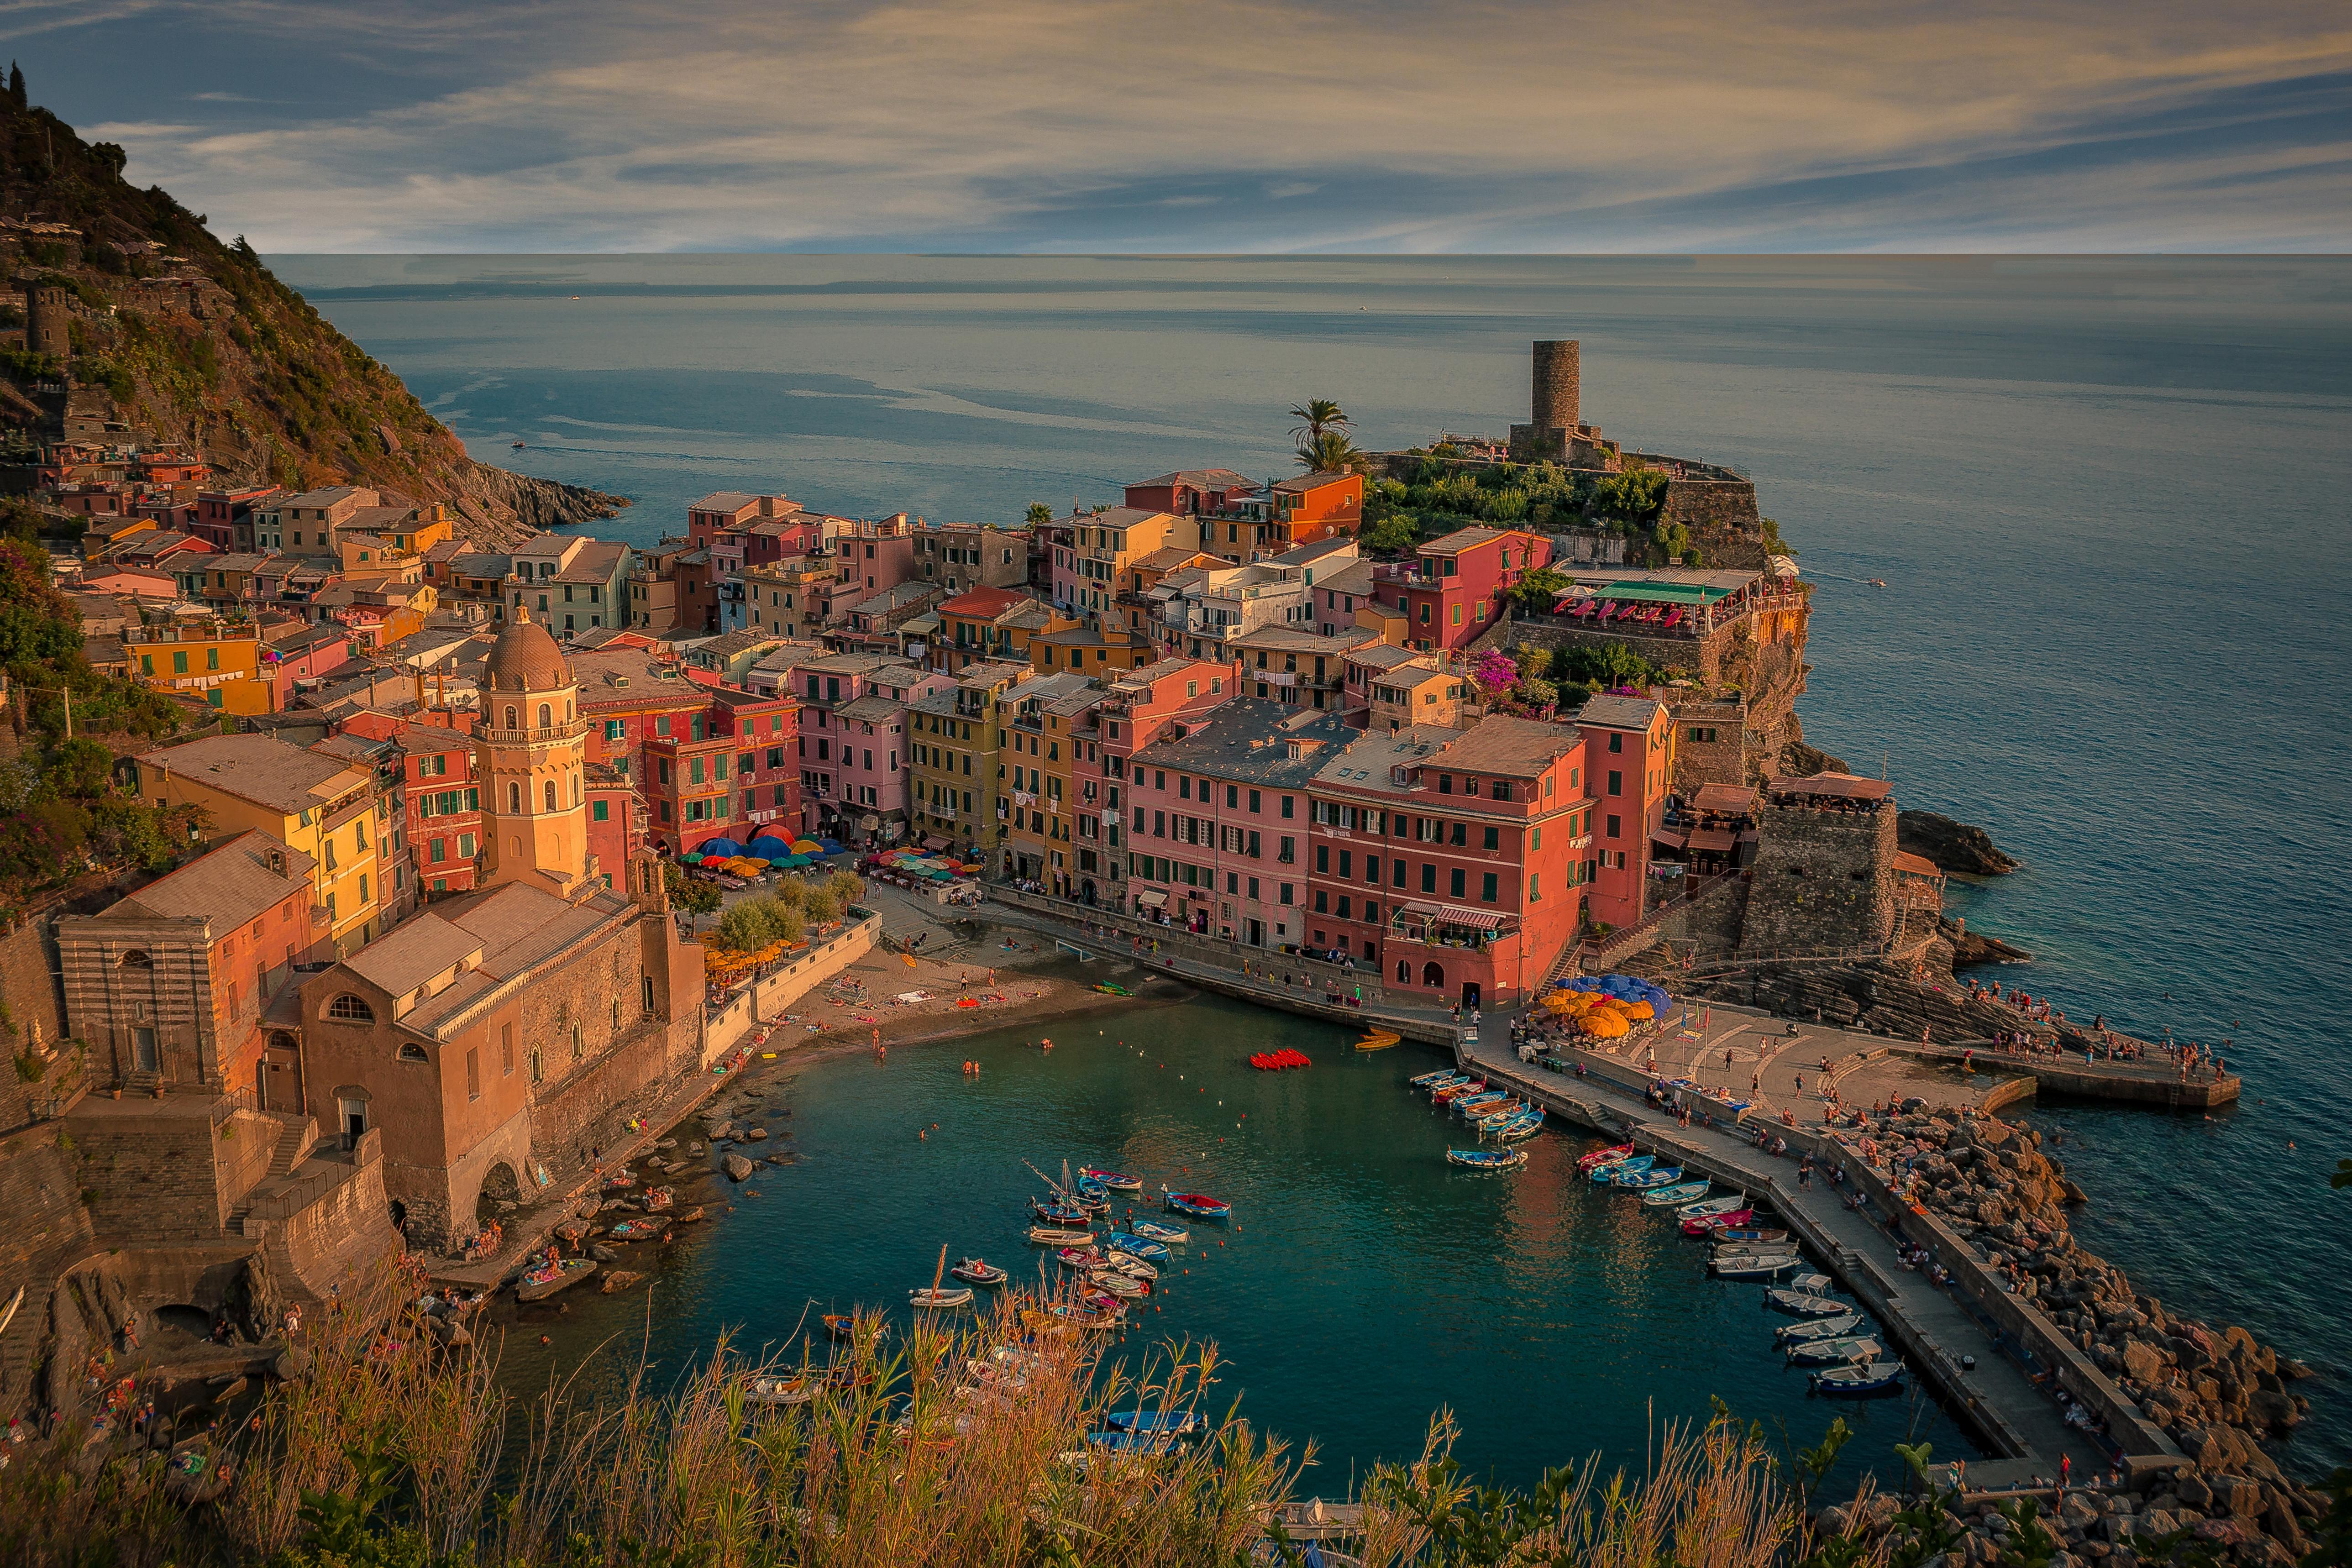 Wallpapers evening vernazza cityscape on the desktop